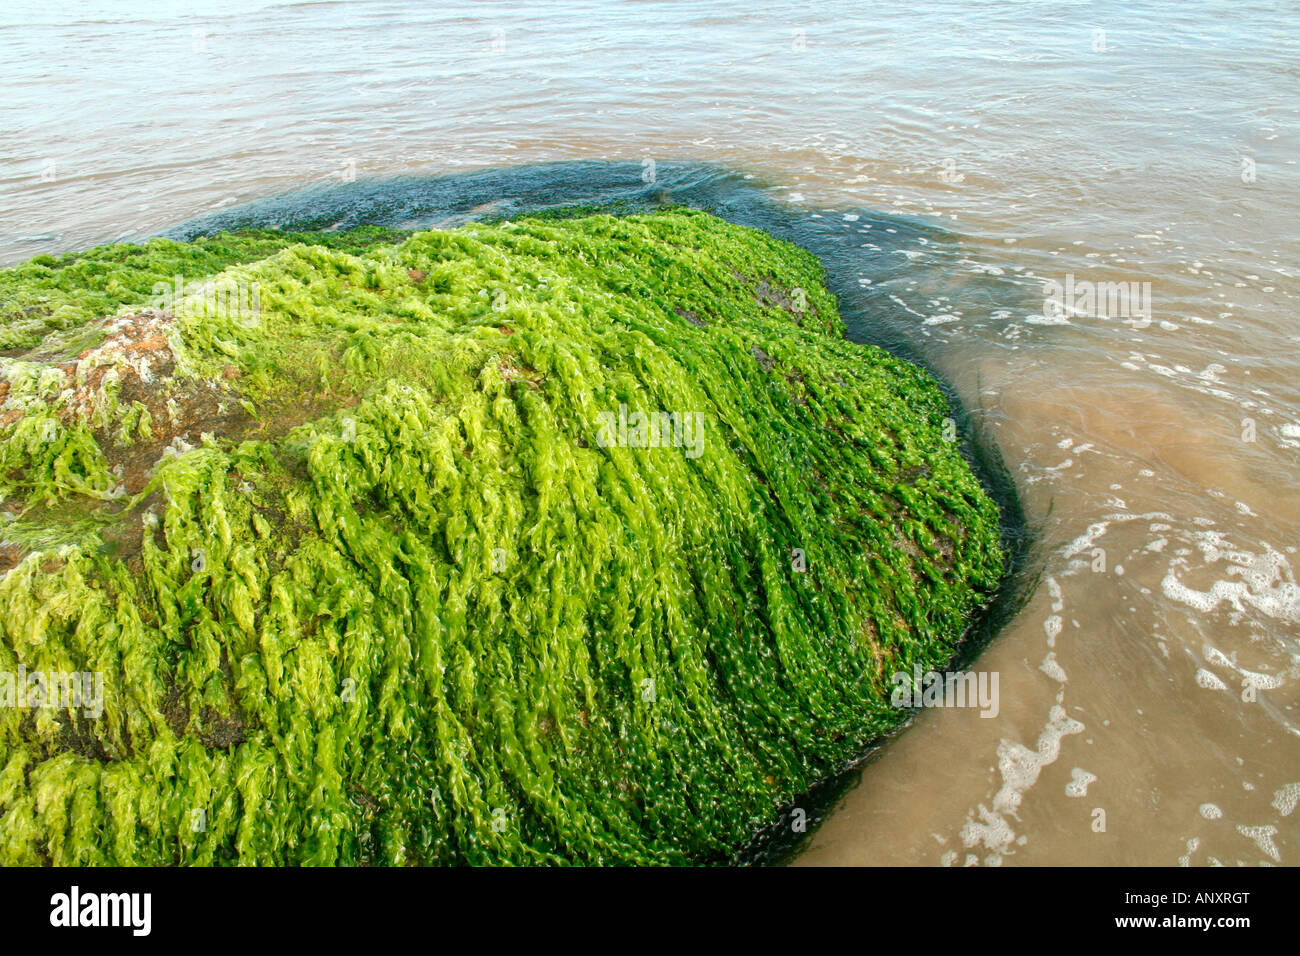 Rock covered with seaweeds on beach during low tide Stock Photo